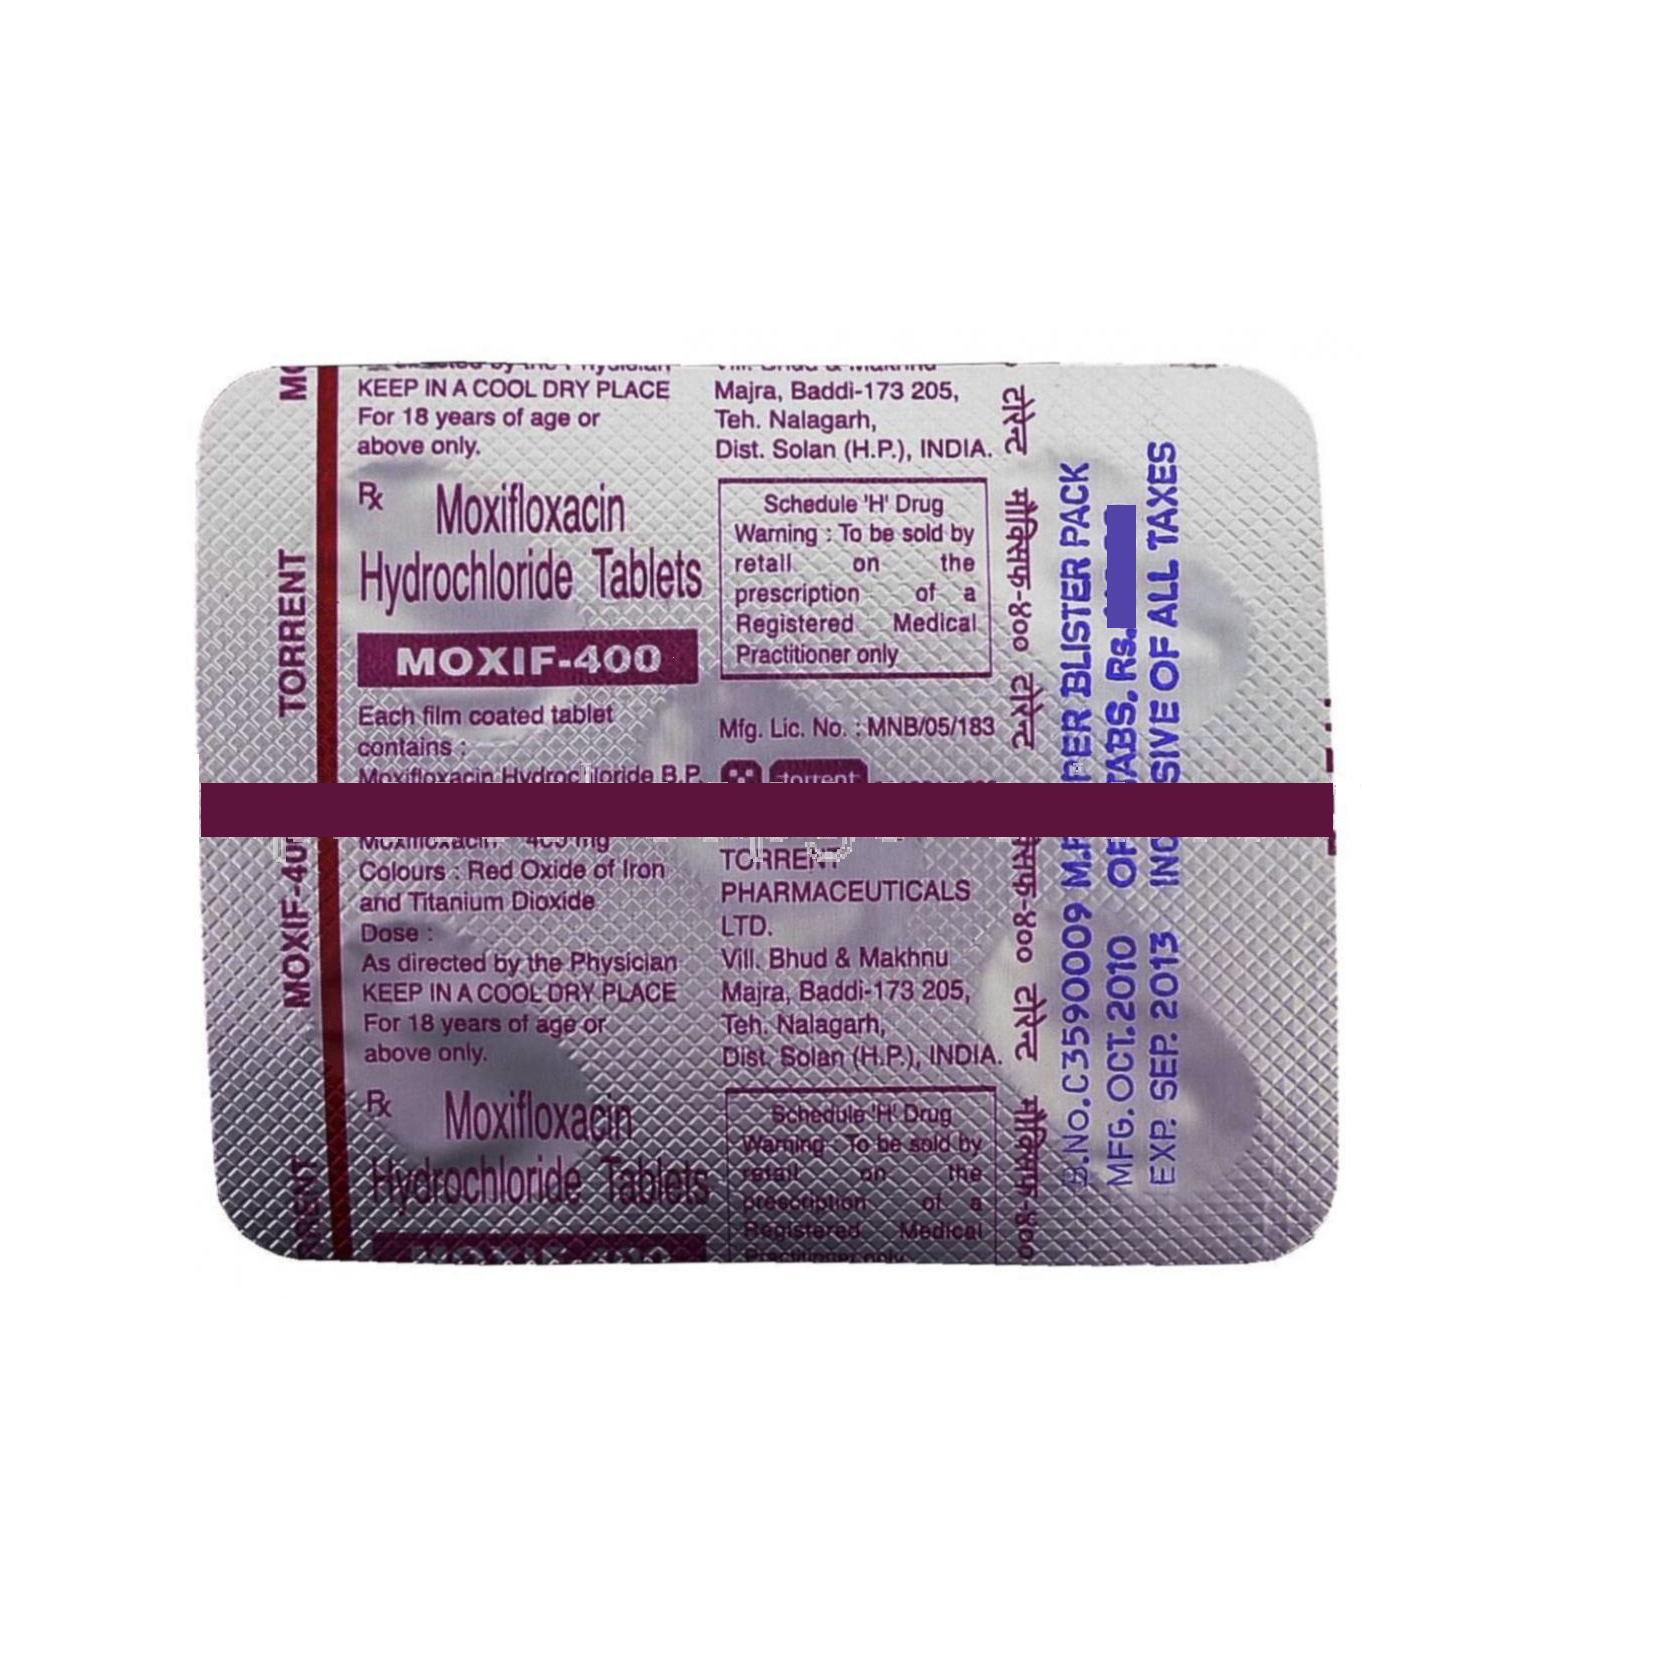 MOXIF 400mg Tablet 15's At Best Price At Flat 25% OFF | 24x7 Pharma